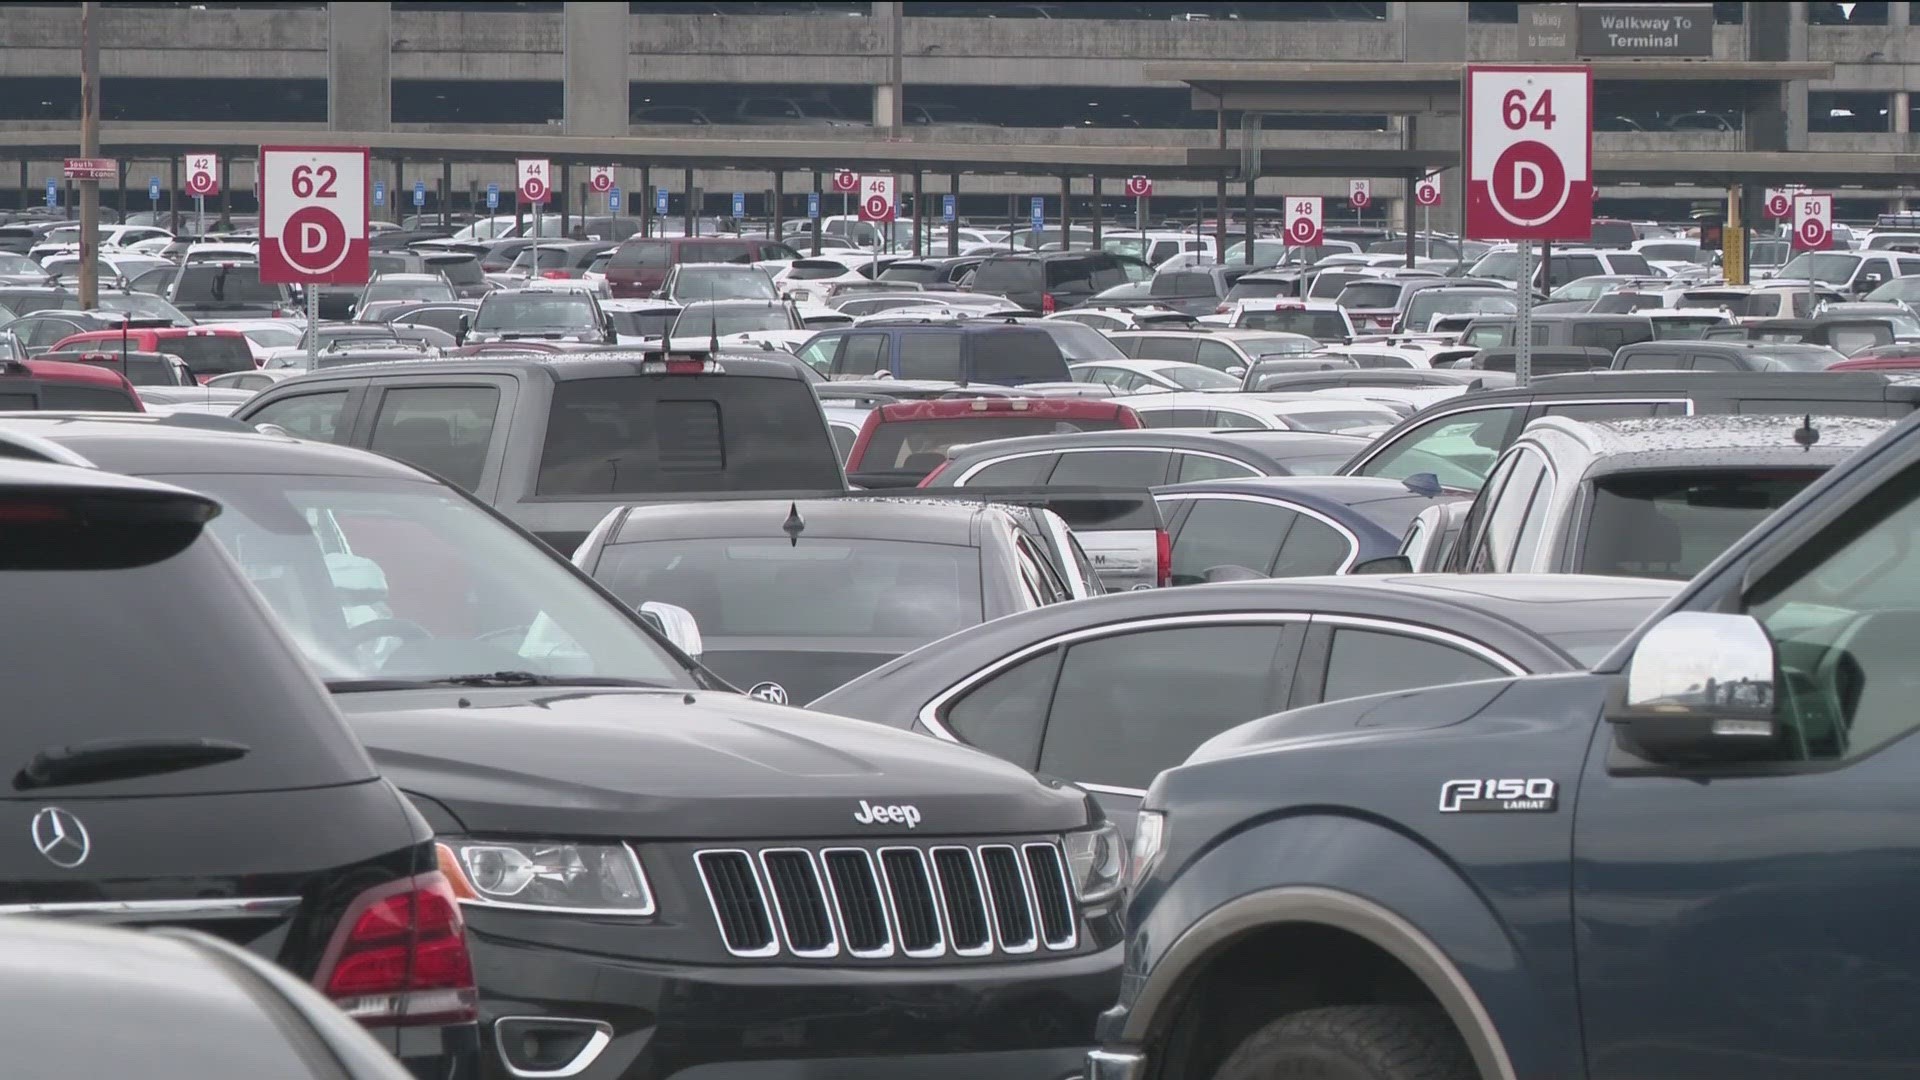 How to reserve parking at Atlanta airport | 11alive.com